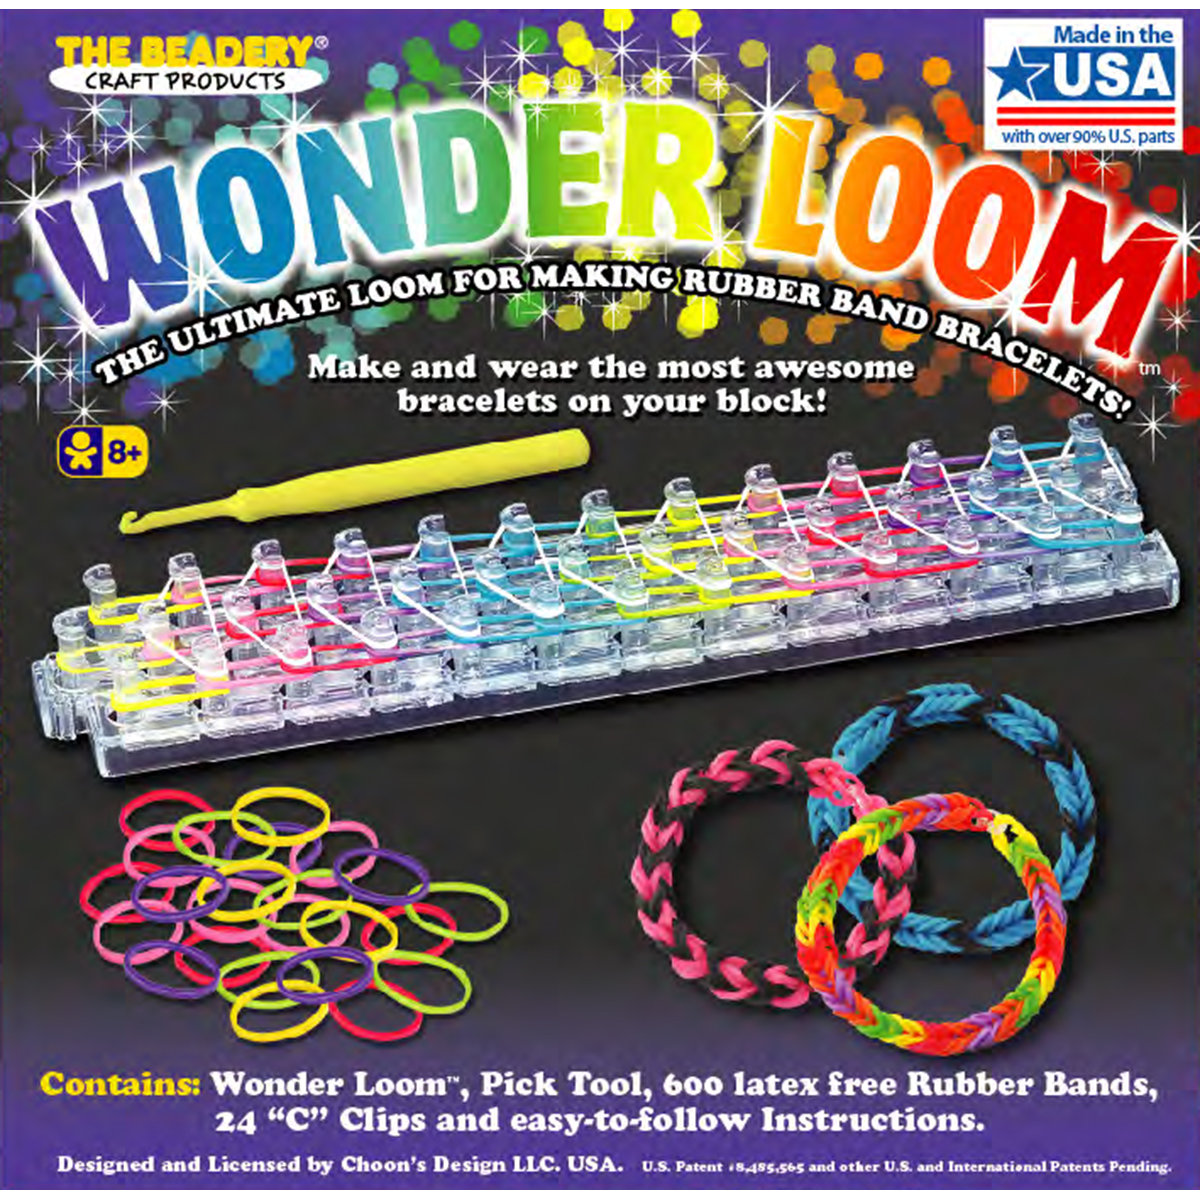 The Beadery Wonder Loom Kit, Gift for Kids, Includes 600 Rubber Bands - image 1 of 7